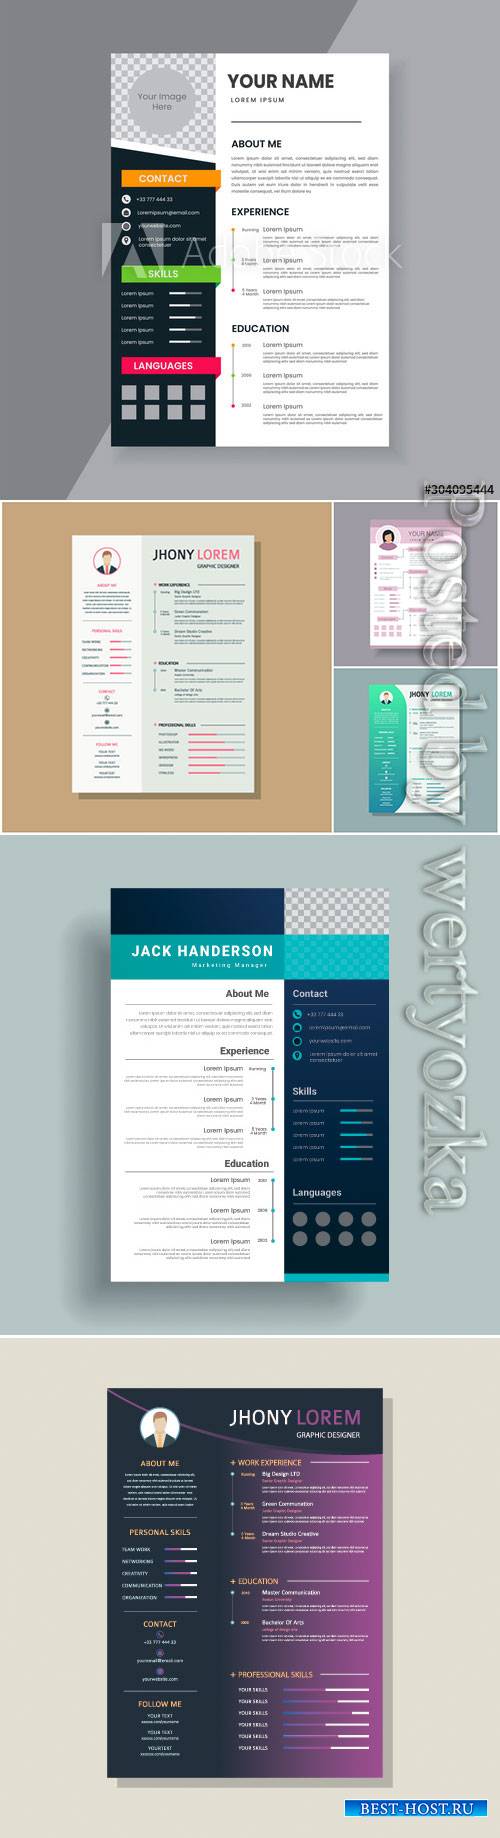 Creative resume and template vector design